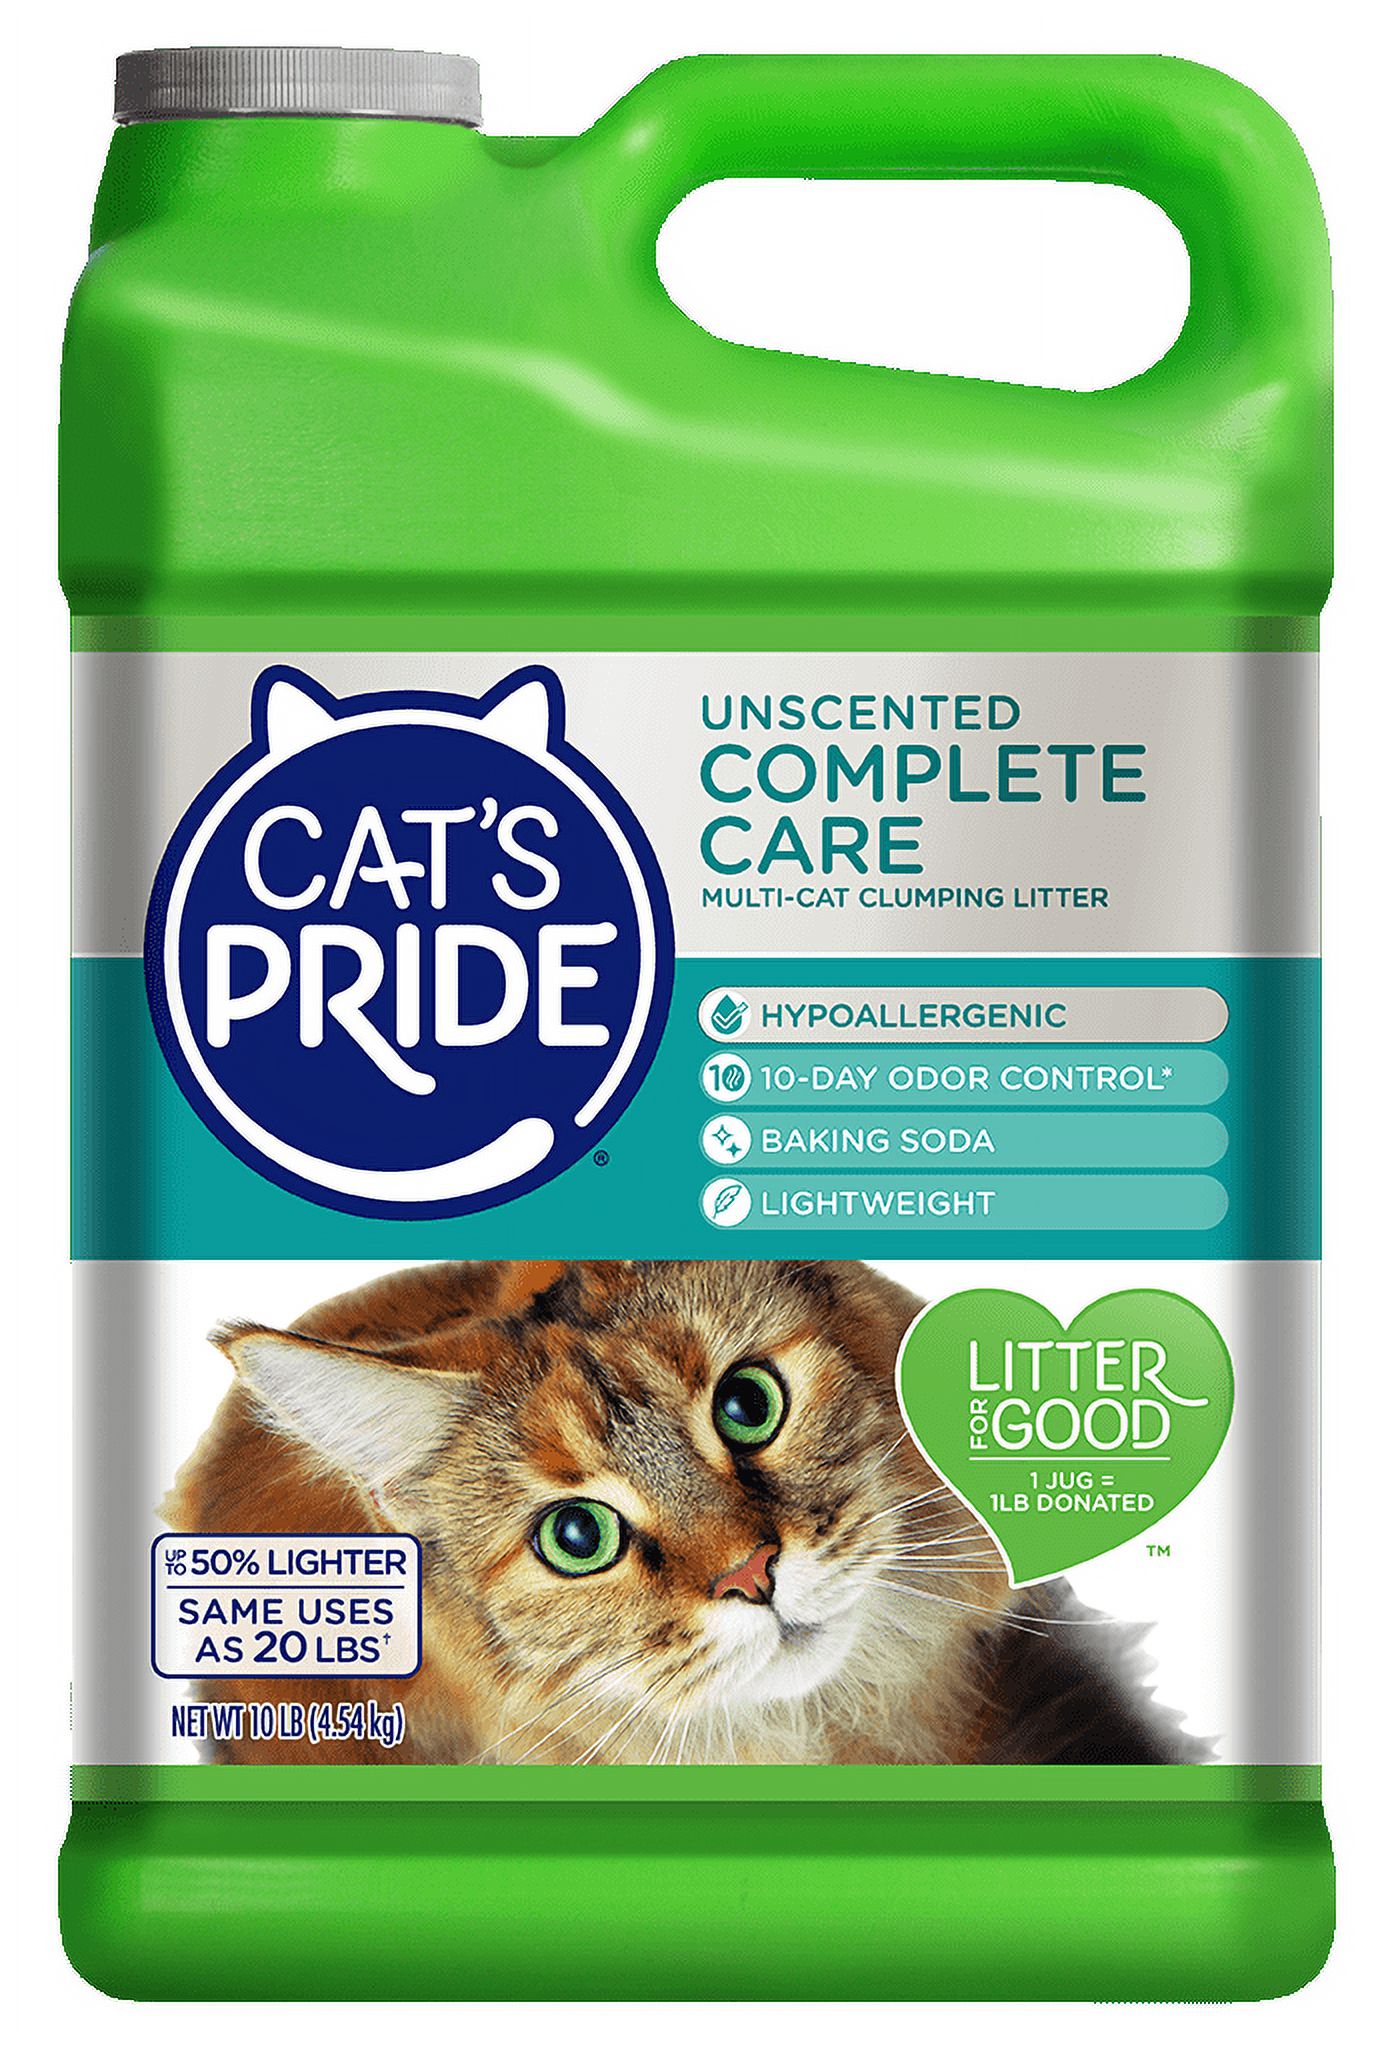 Cat's Pride Complete Care Unscented Hypoallergenic Multi-Cat Clumping Litter, 10 lb Jug - image 9 of 9